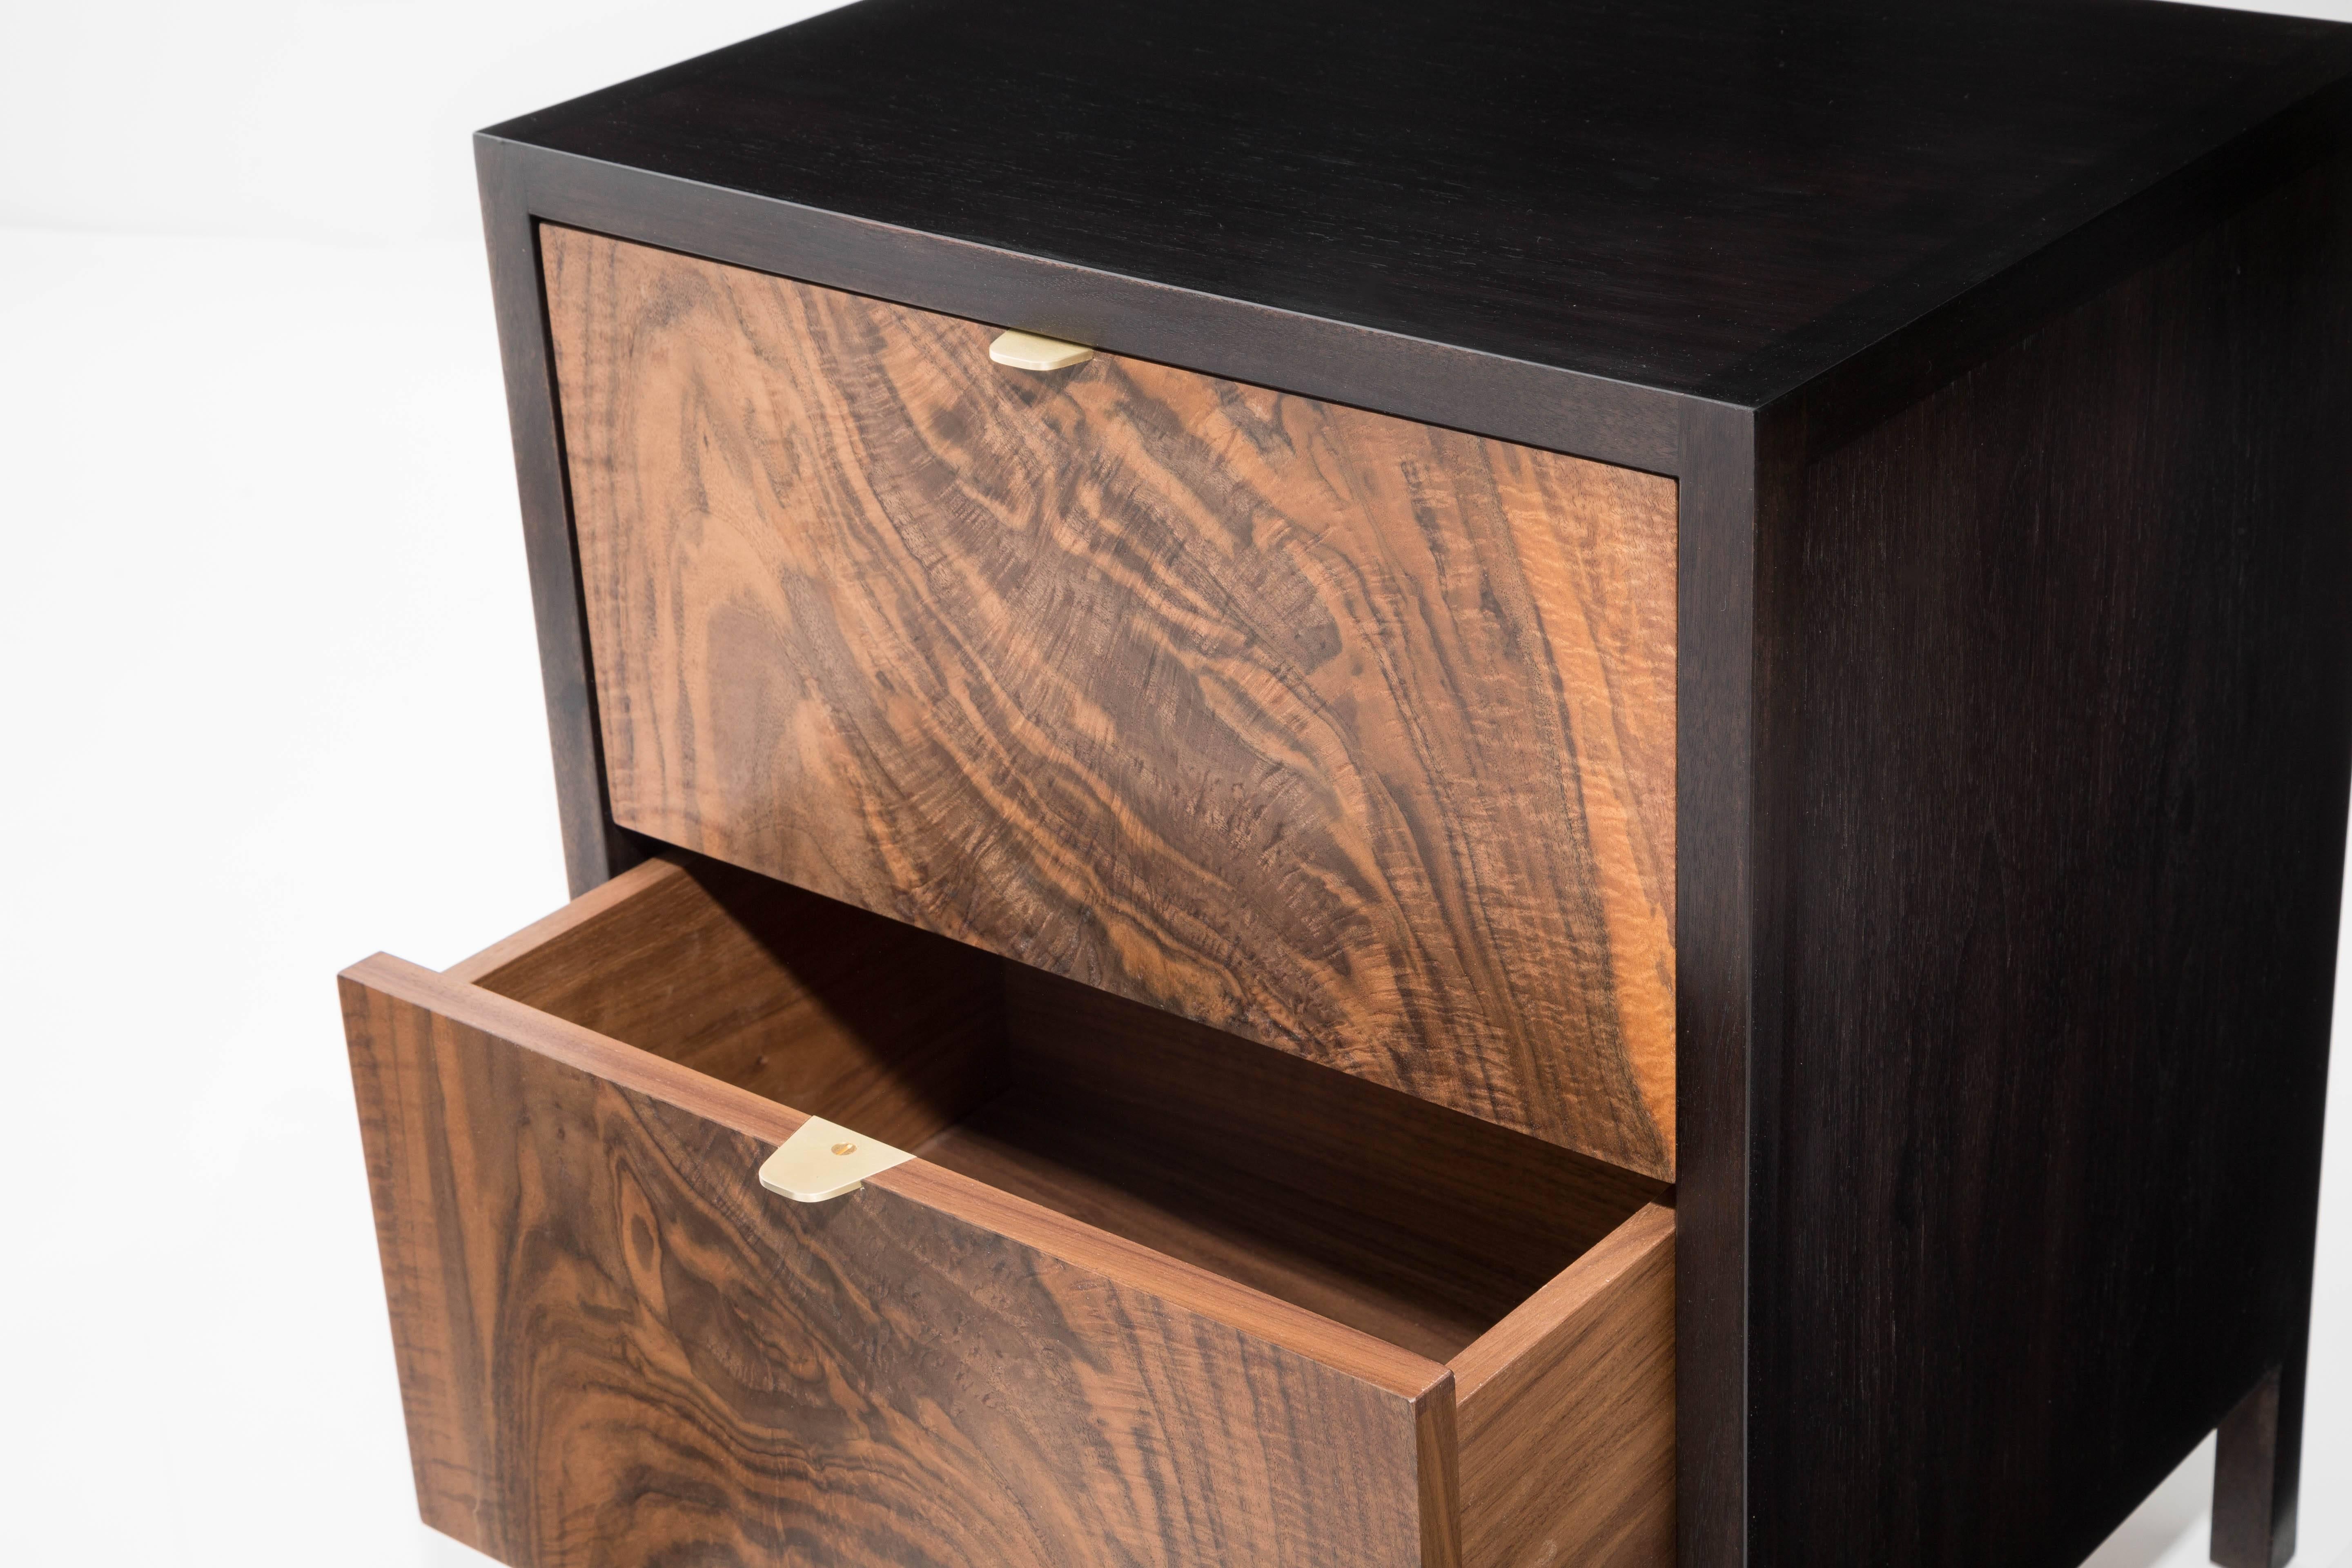 The Laska Nightstand is built in our Brooklyn studio using premium hardwoods and thoughtfully selected wood veneers. This piece features custom veneered panels framed flush with solid hardwood edges and legs. The two drawers showcase crotch-cut